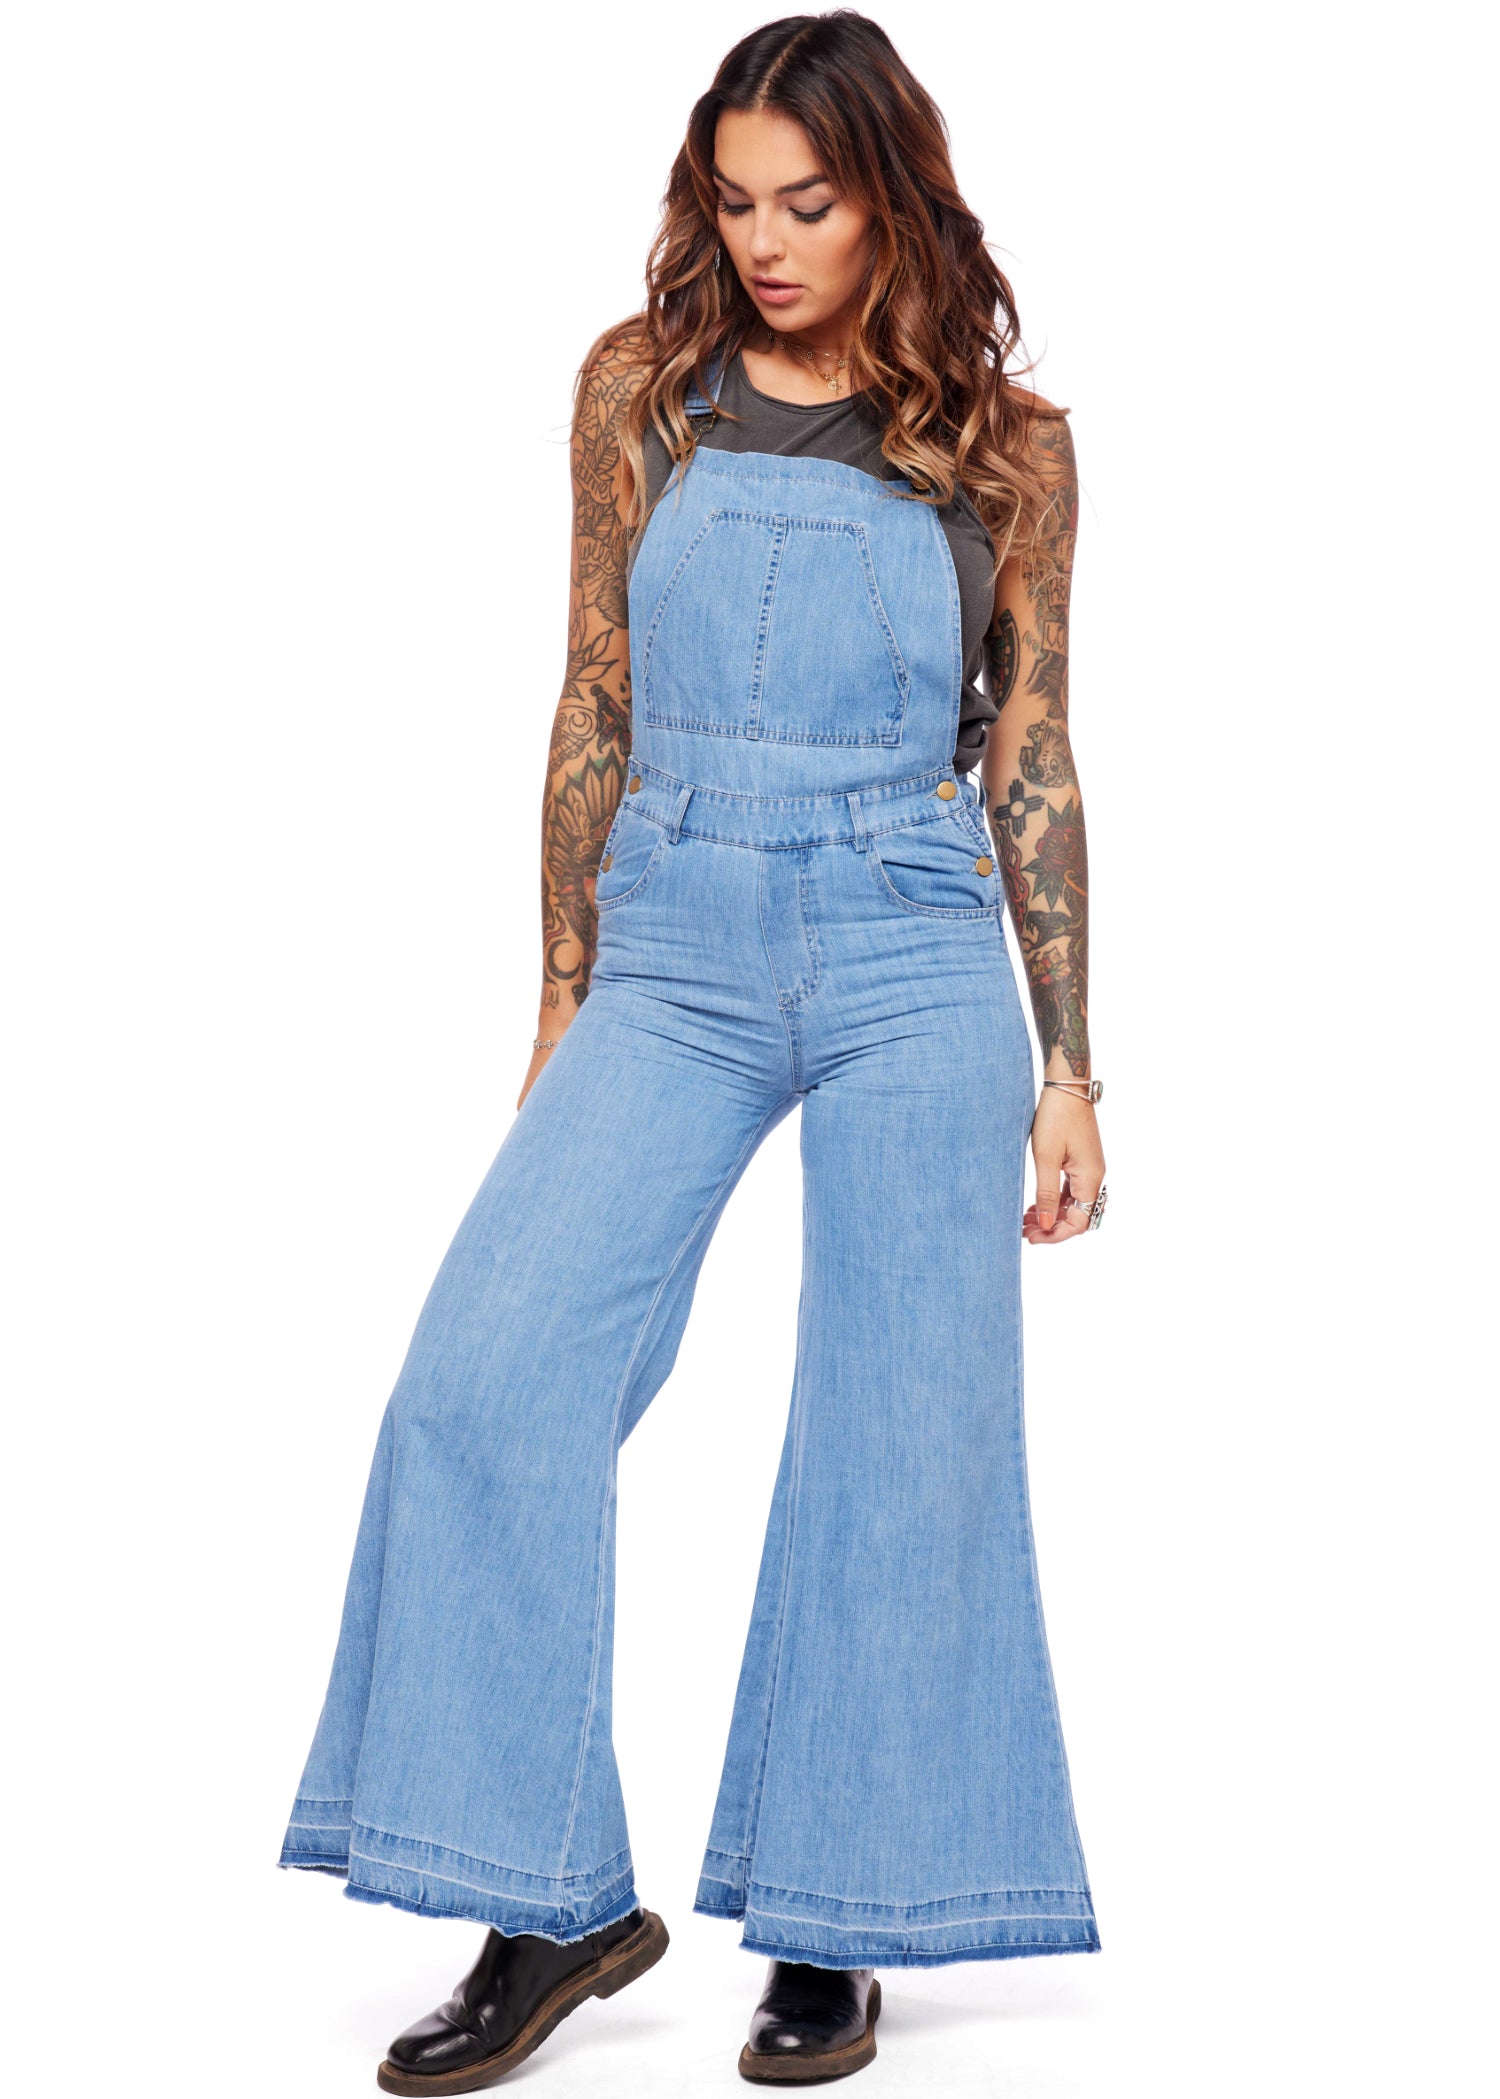 Listicle Undone Flare Denim Overalls - Women's Rompers/Jumpsuits